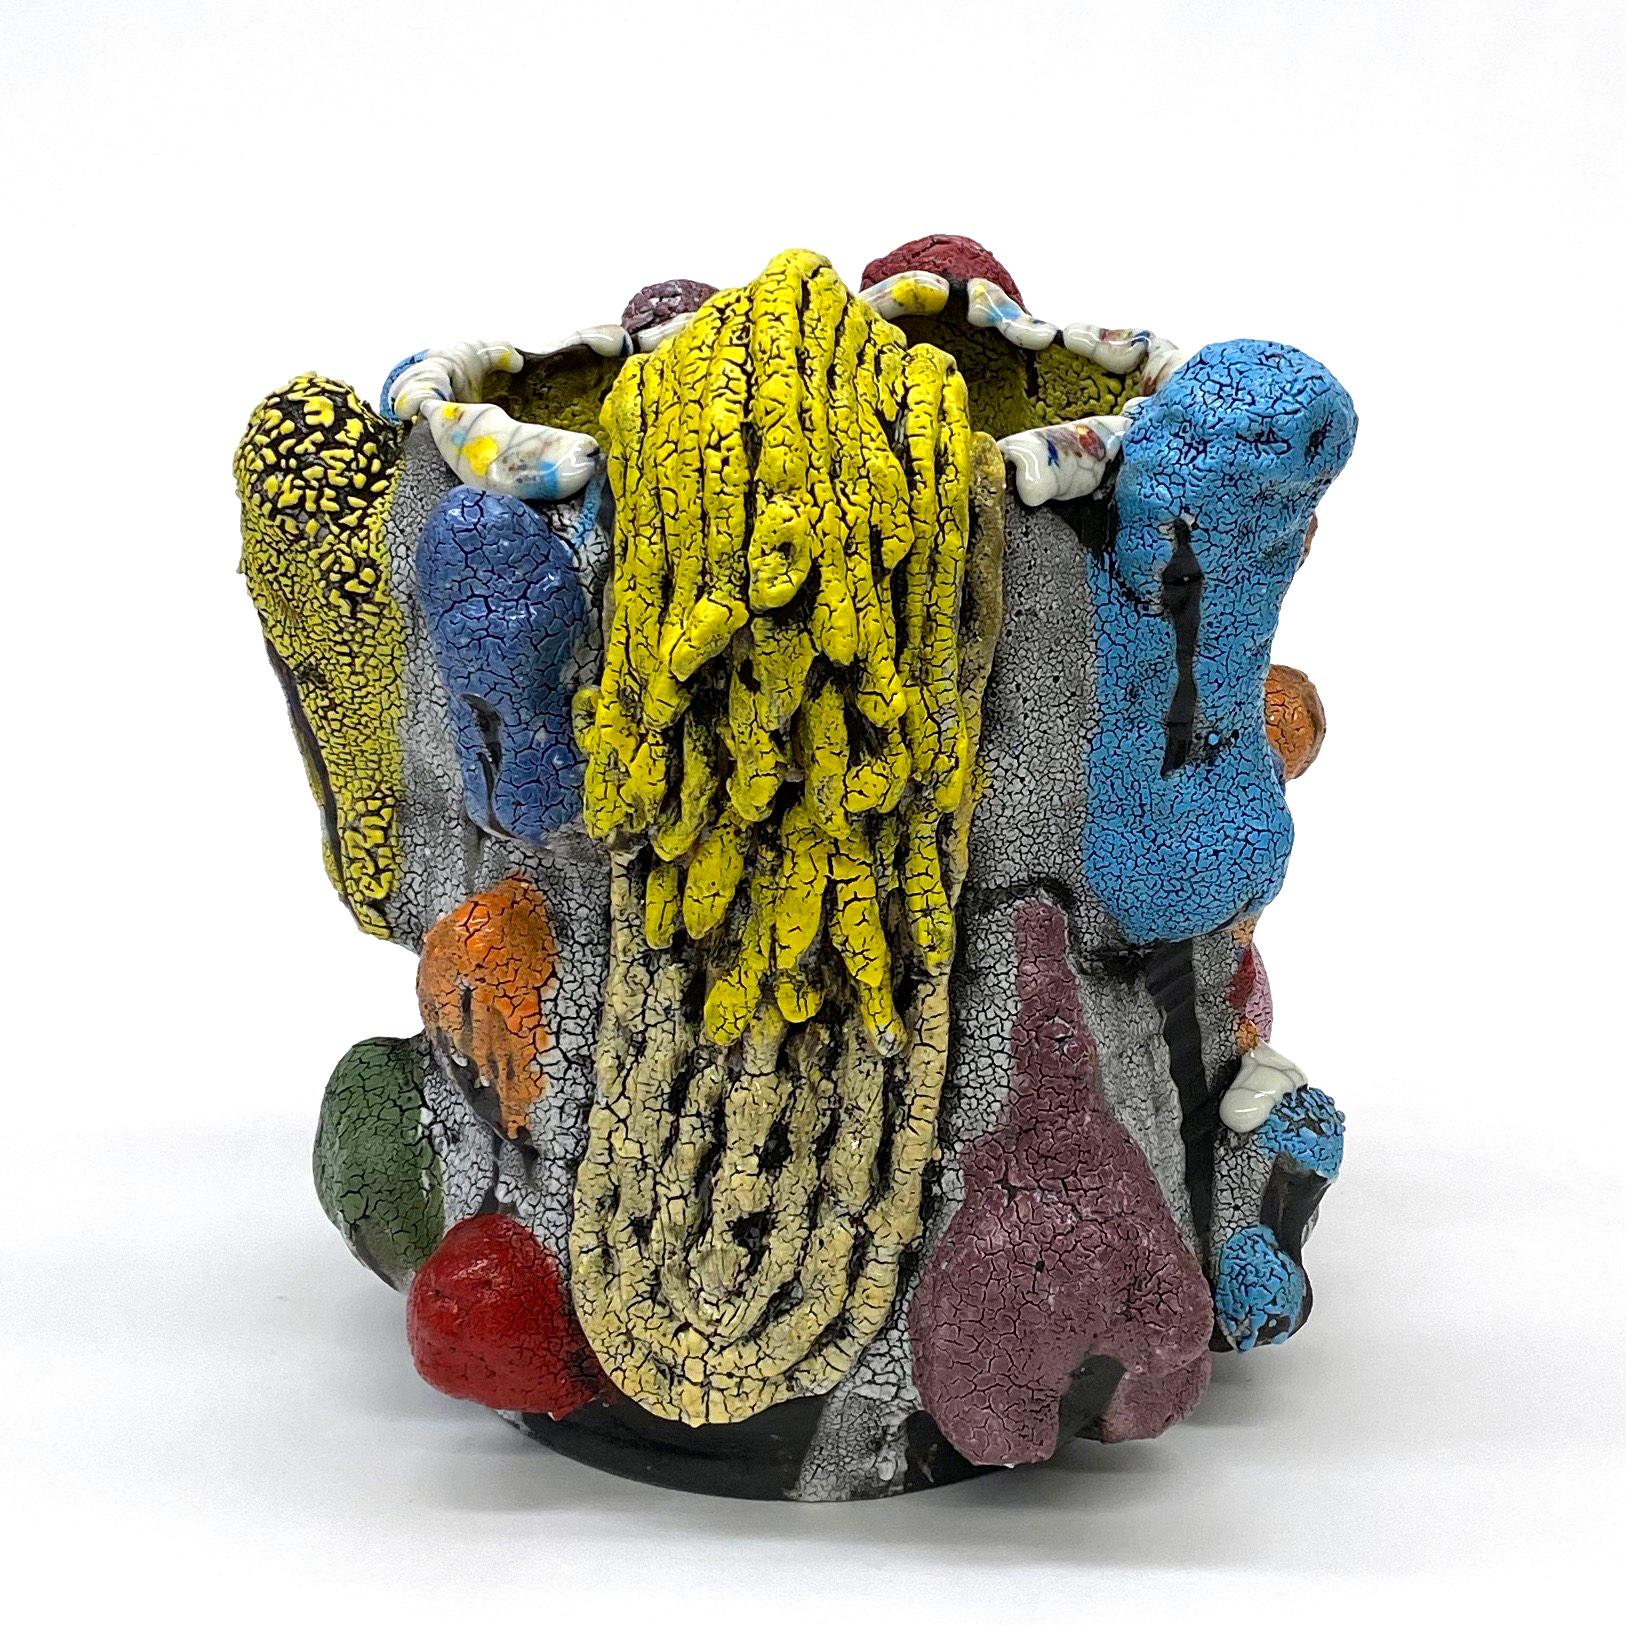 Vince Palacios Abstract Sculpture - "Potato Tree with Yellow Vines", Contemporary, Abstract, Ceramic, Sculpture